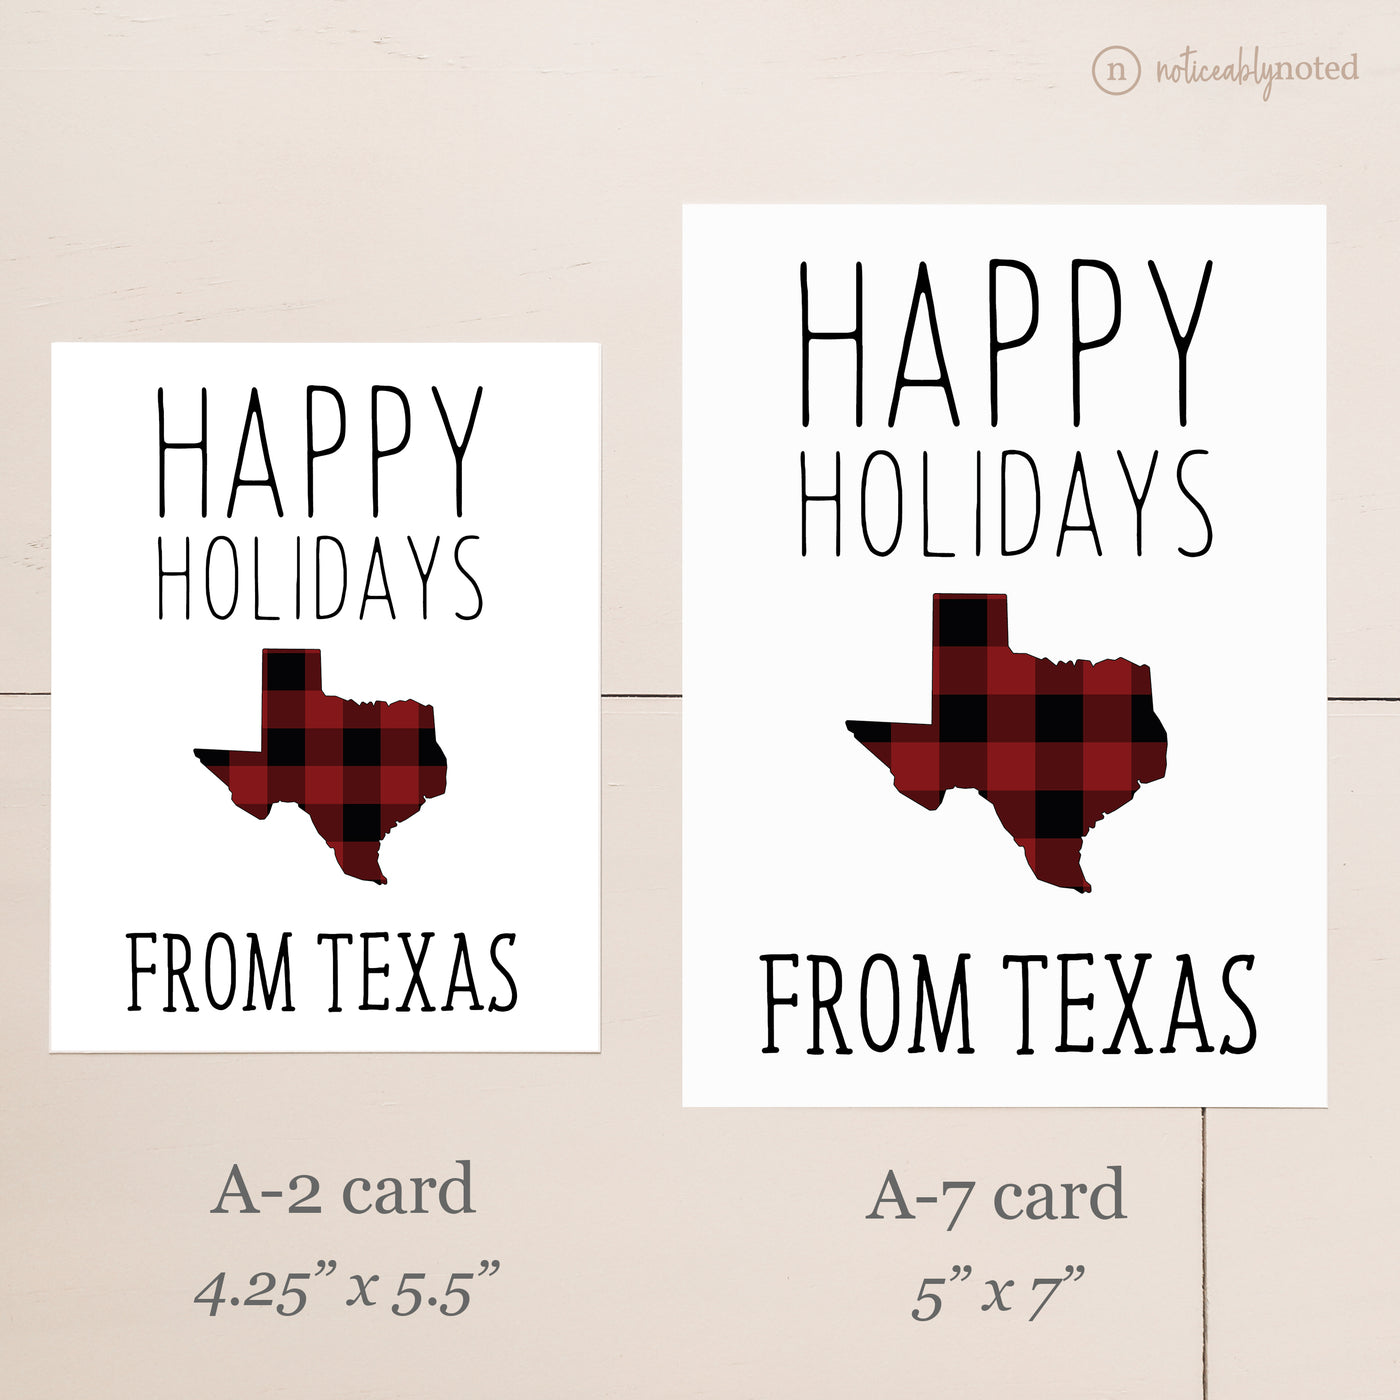 Texas Holiday Card - Card Size Comparison | Noticeably Noted